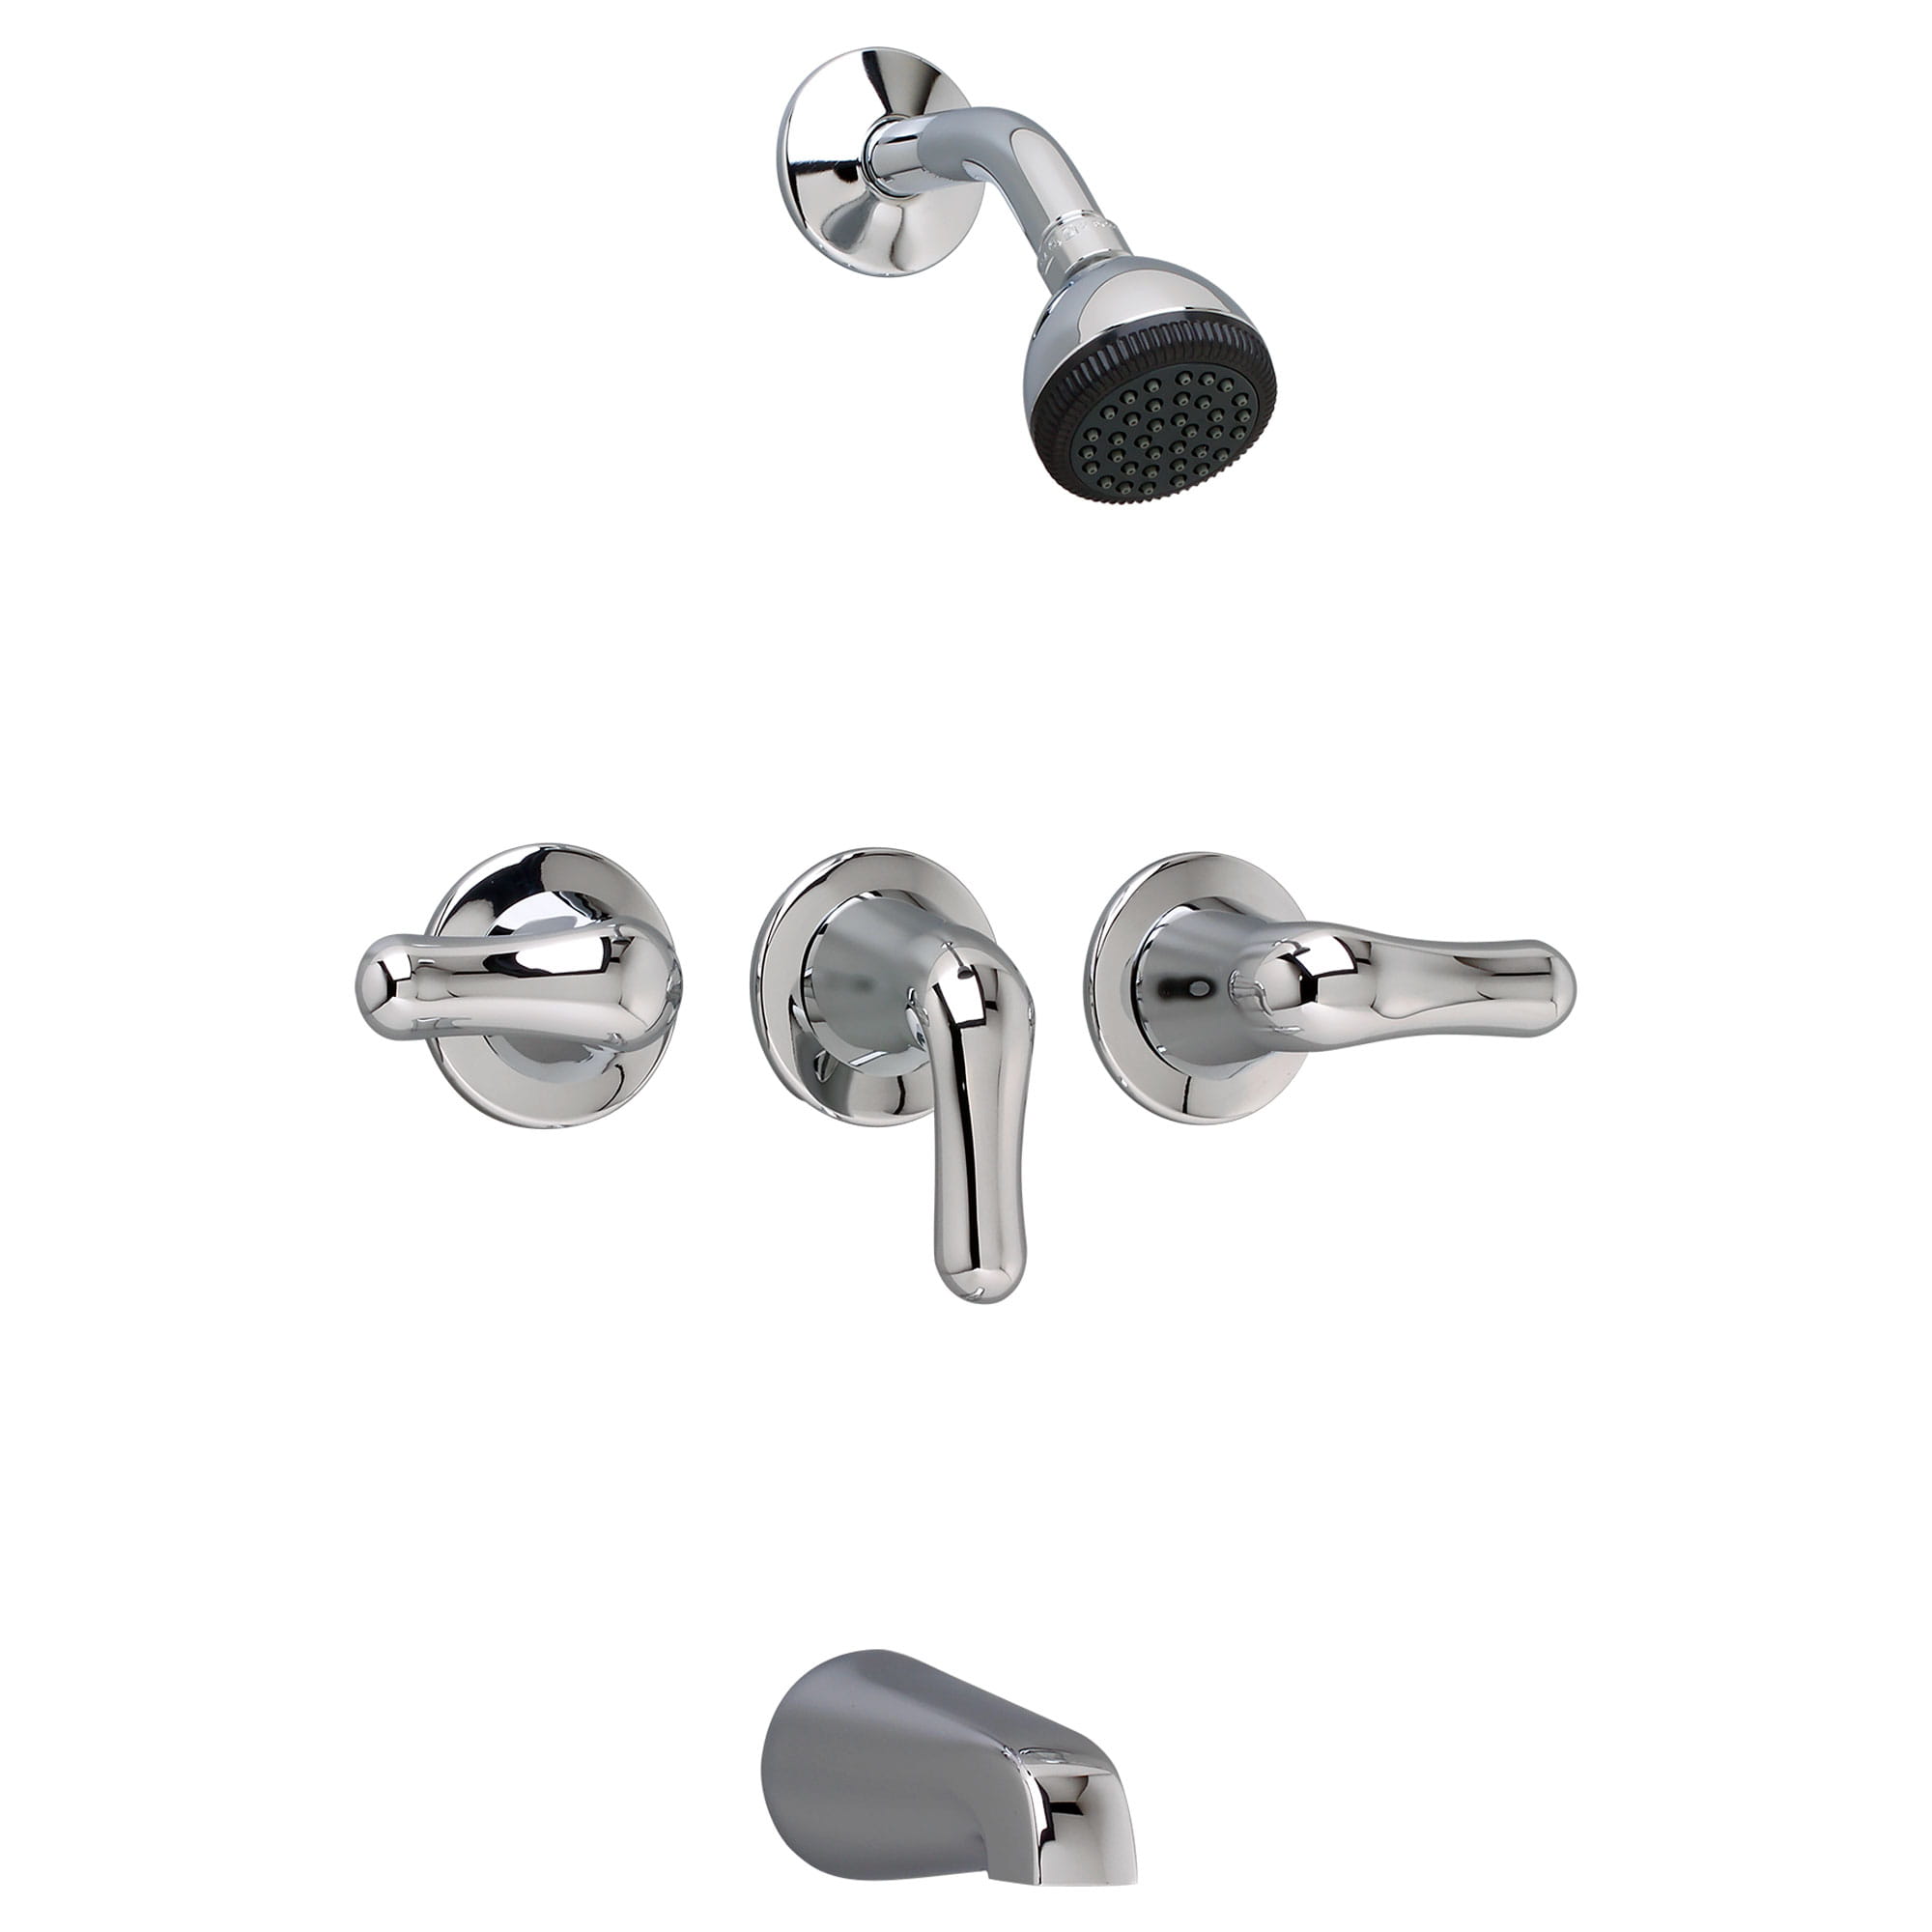 Colony Soft 25 gpm 95 L min 3 Handle Tub and Shower Valve and Trim Kit With Lever Handles CHROME